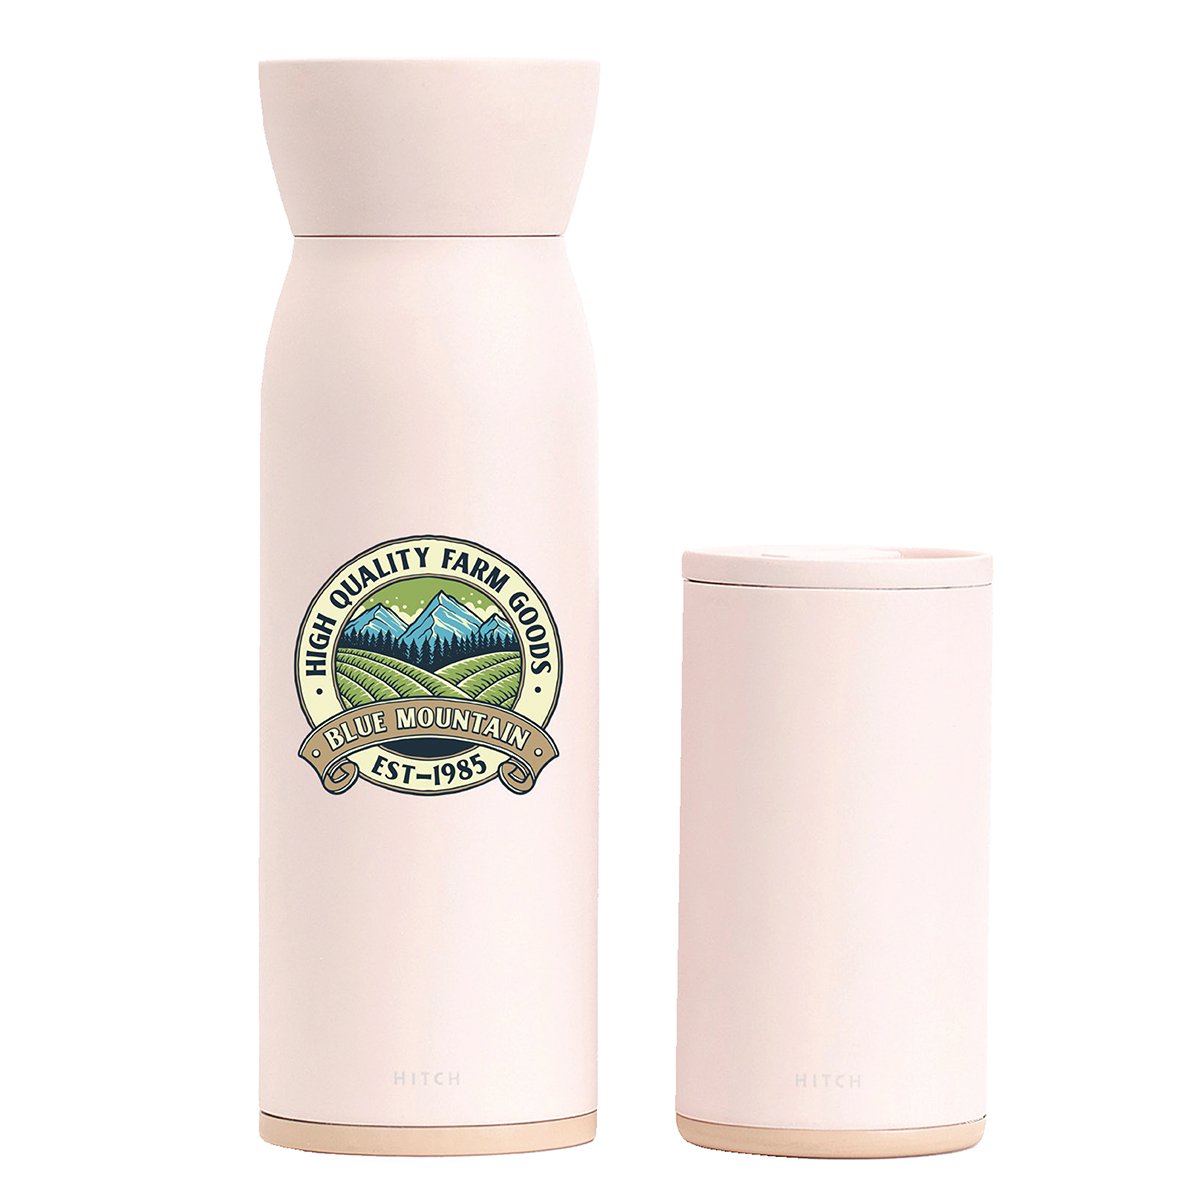 Custom Printed Hitch Brand Bottle with Cup Combo